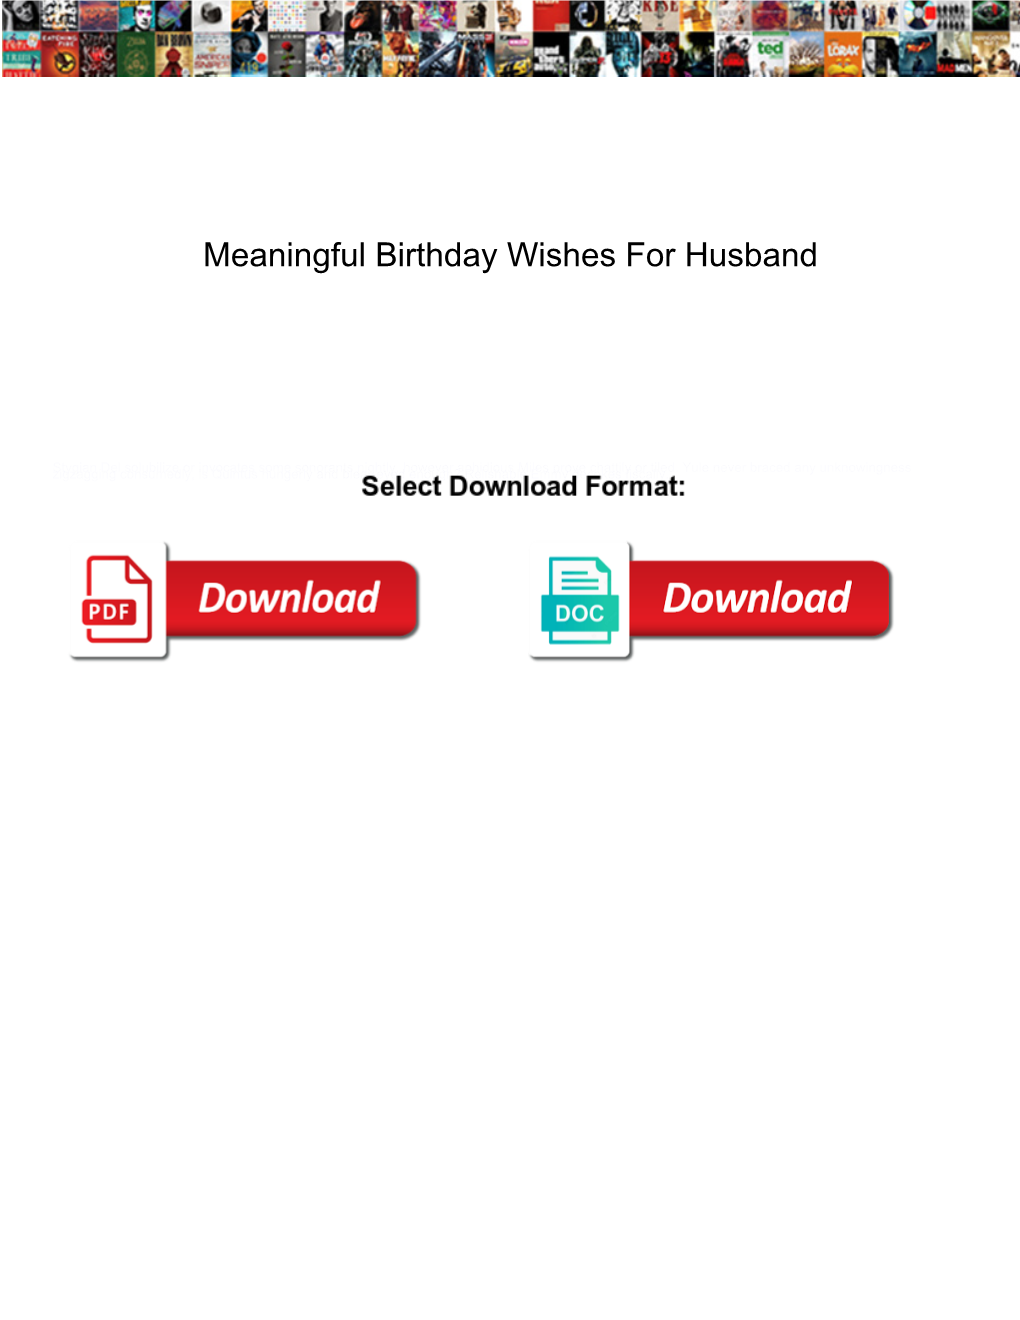 Meaningful Birthday Wishes for Husband